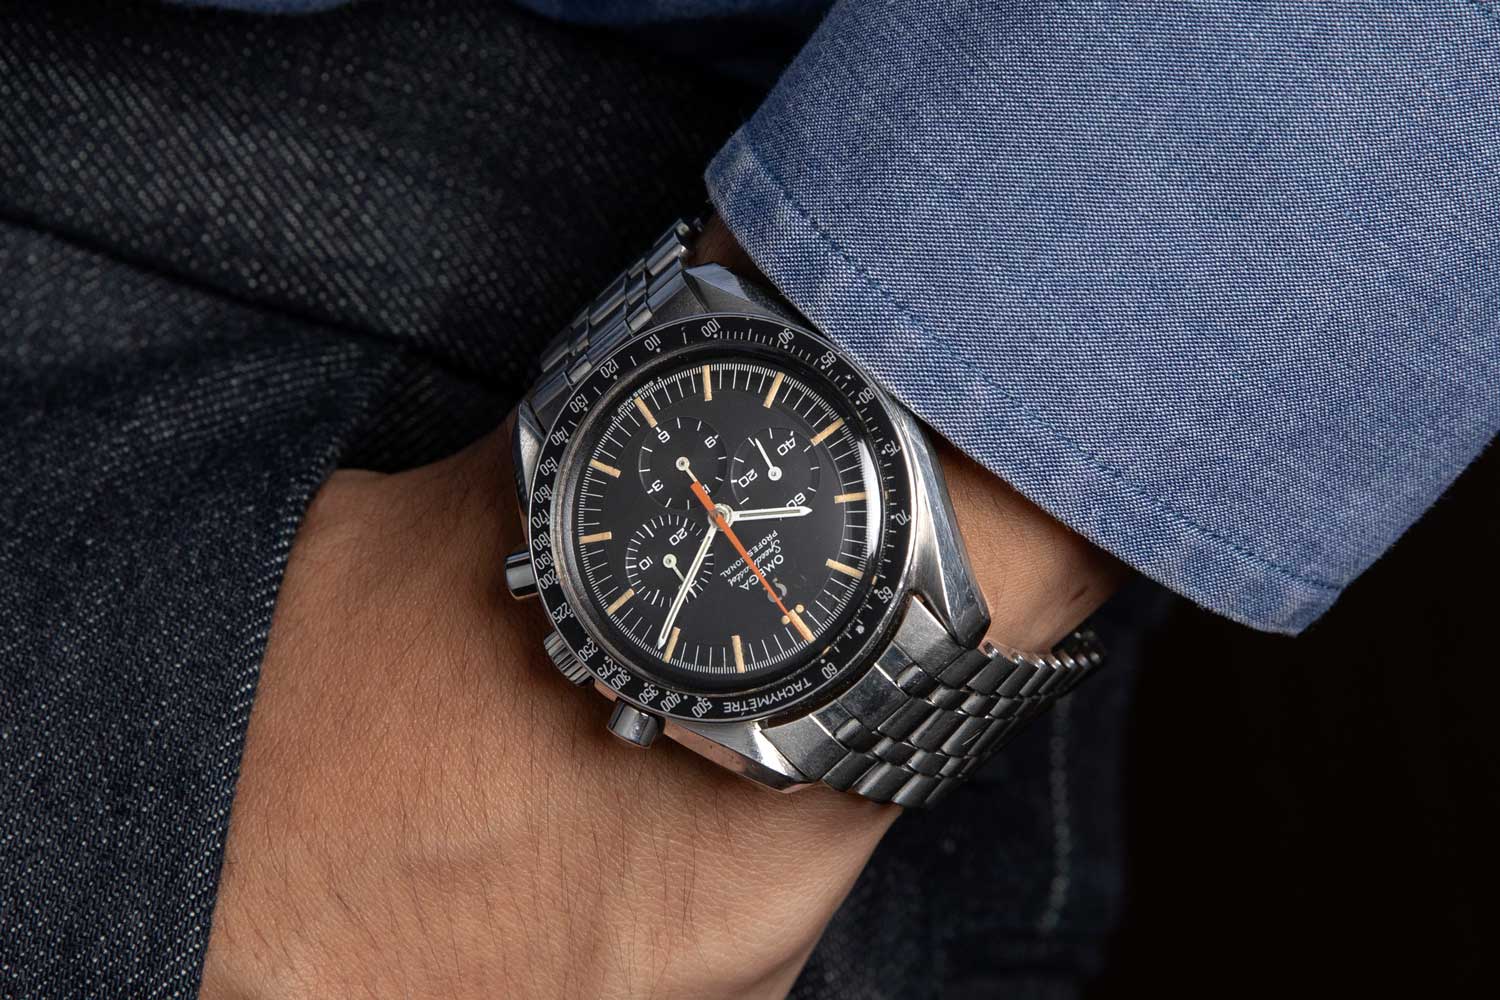 Revolution's Speedmaster Reference 145.012-67 Ultraman with a Holzer bracelet (Los Hombre Ultra), acquired from the Davidoff Brothers (©Revolution)